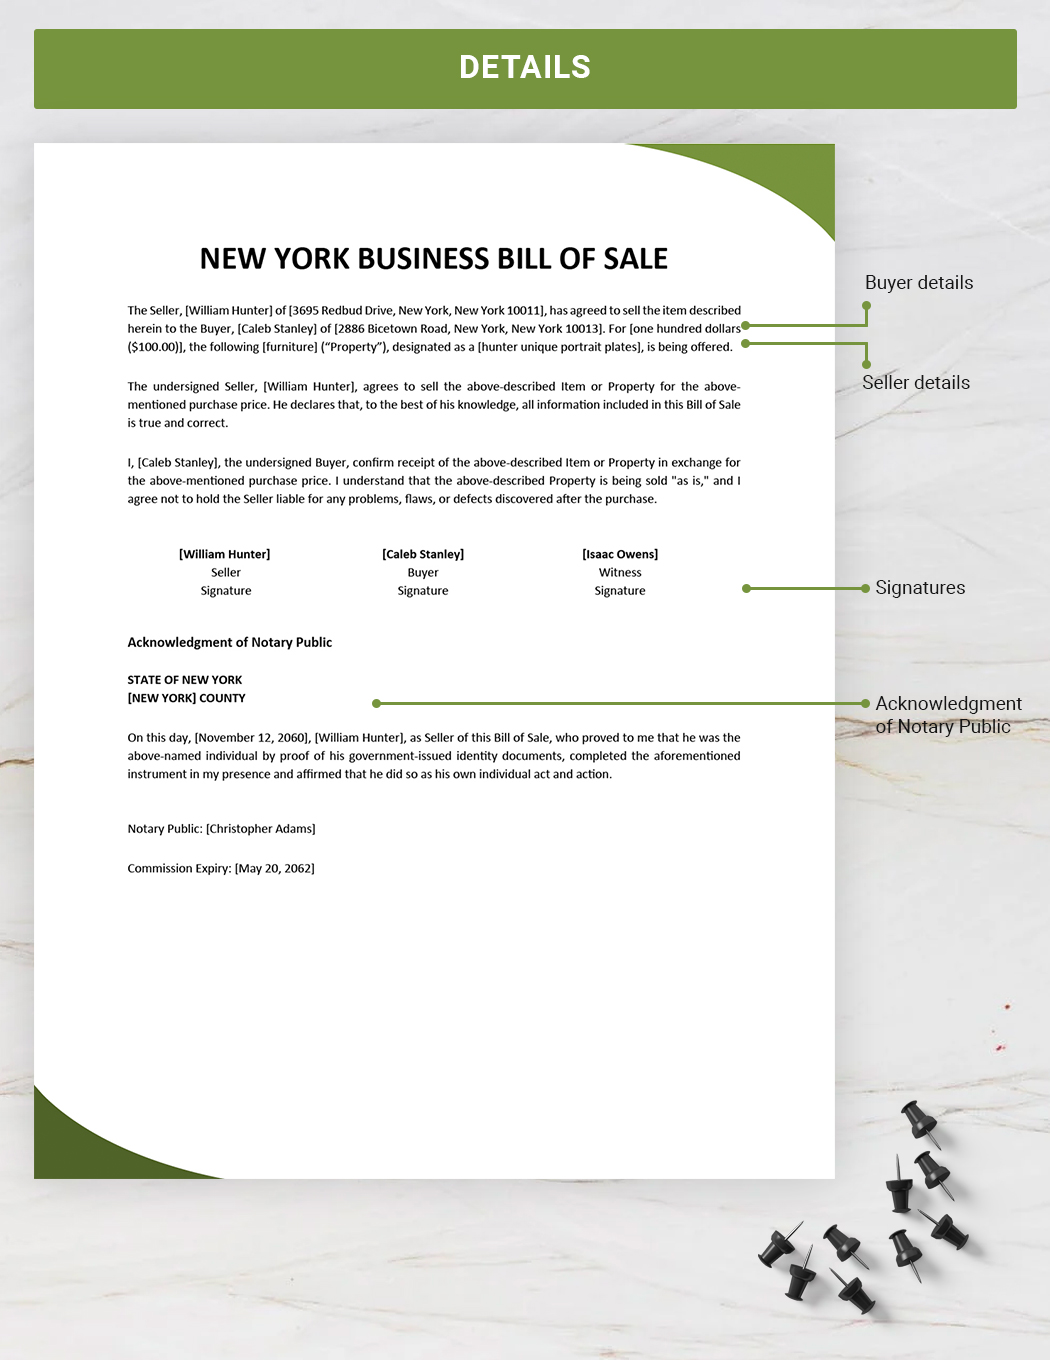 New York Business Bill of Sale Template